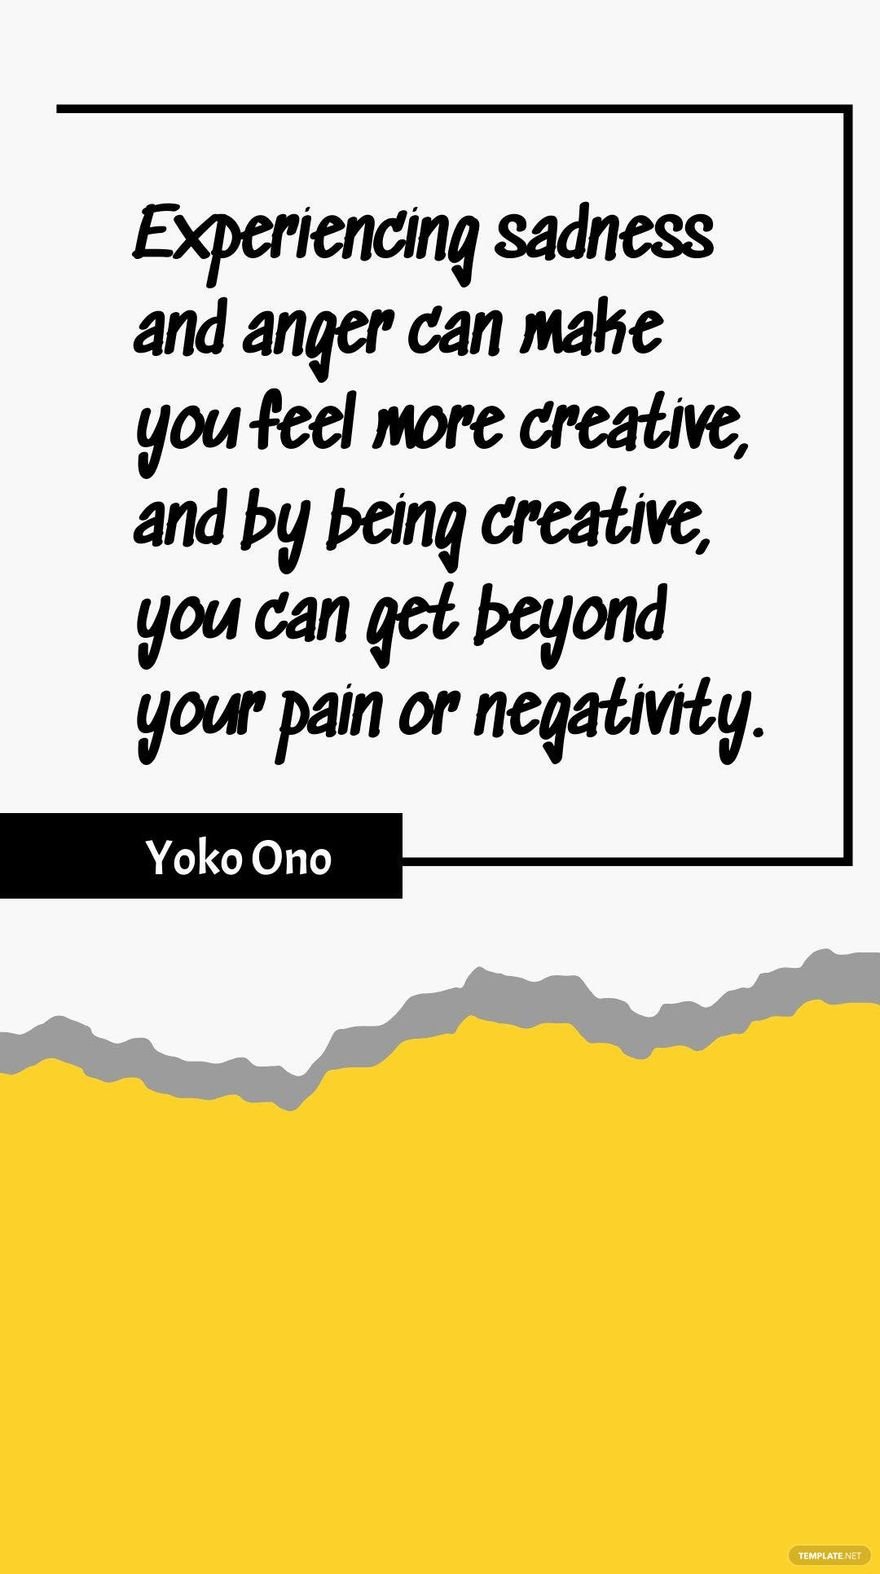 Yoko Ono - Experiencing sadness and anger can make you feel more creative, and by being creative, you can get beyond your pain or negativity.